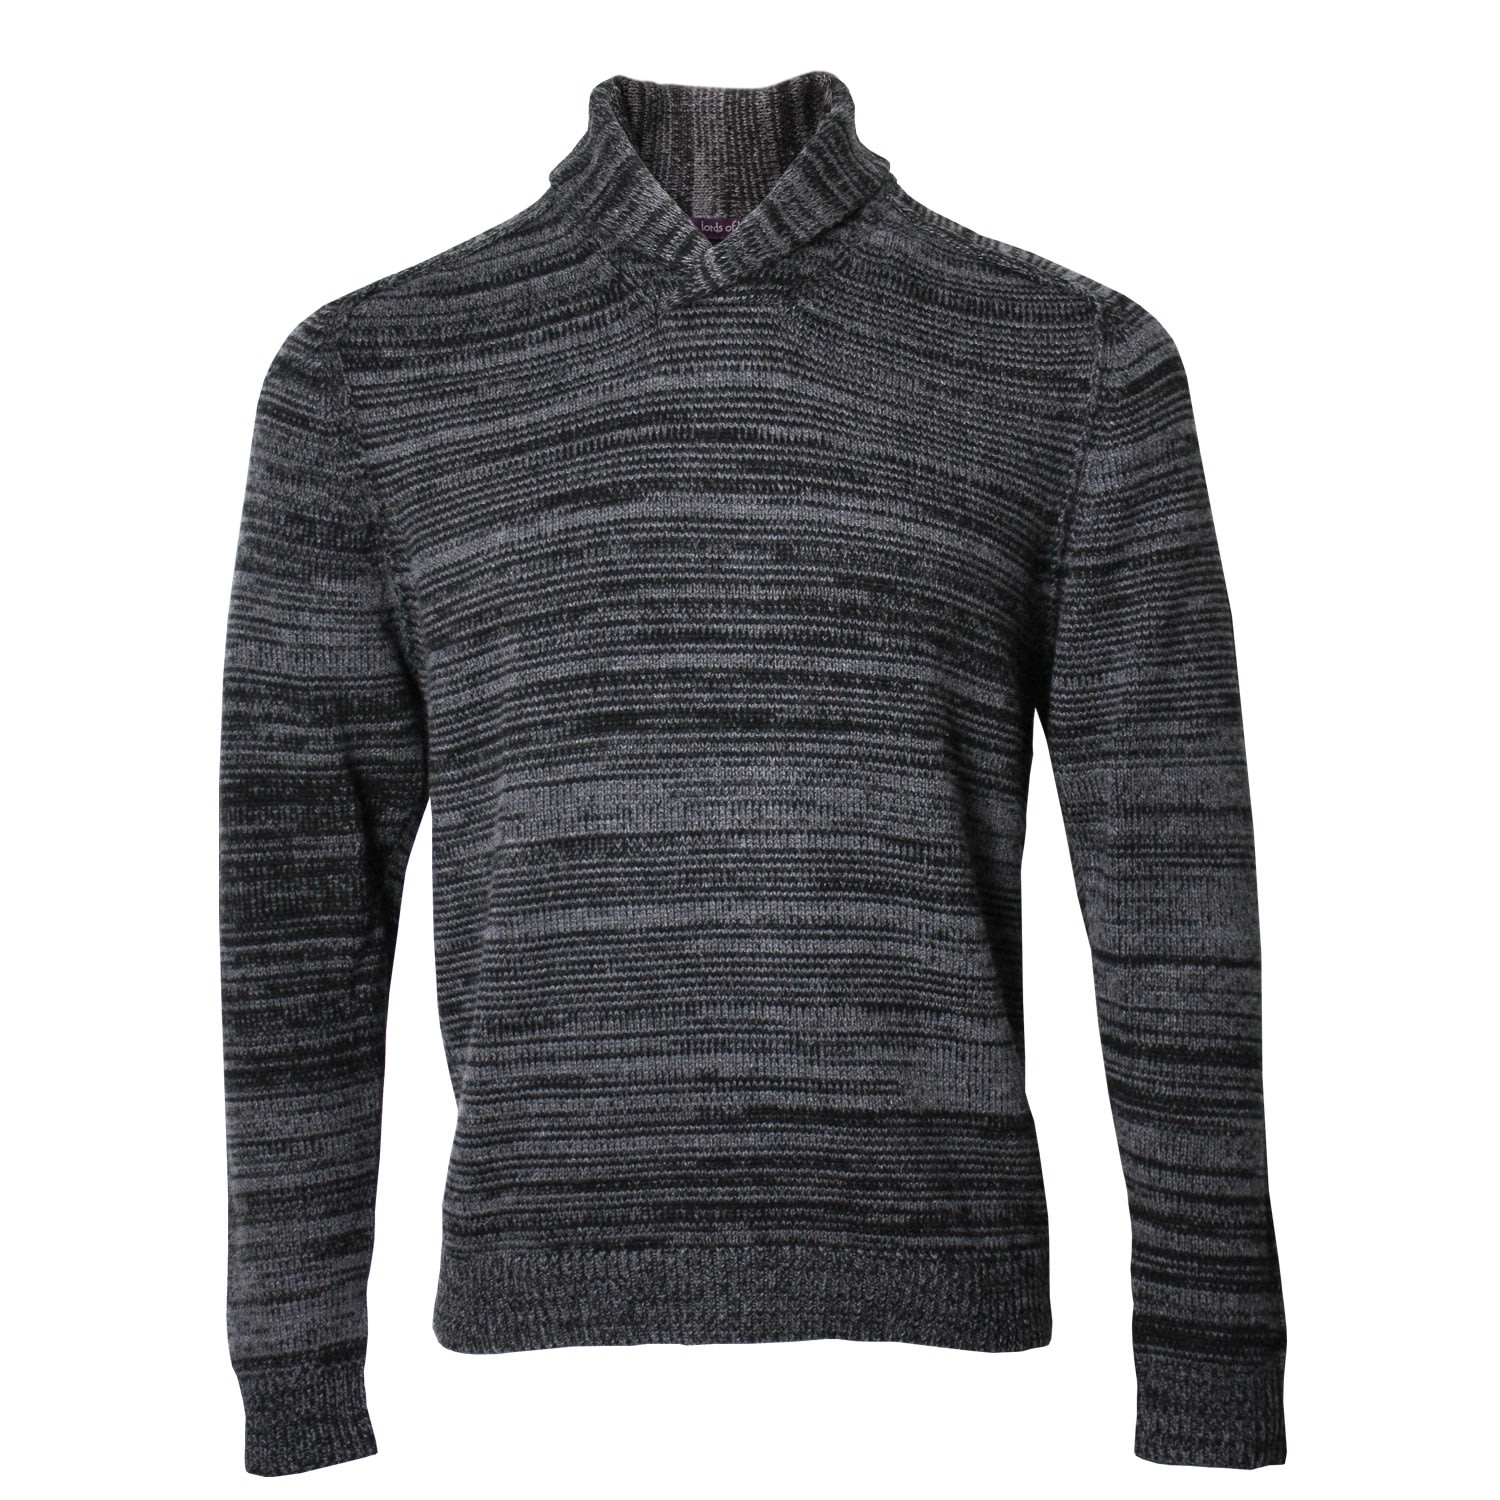 Men’s Black / Grey Sweet Shawl Neck Sweater In Charcoal Extra Large Lords of Harlech